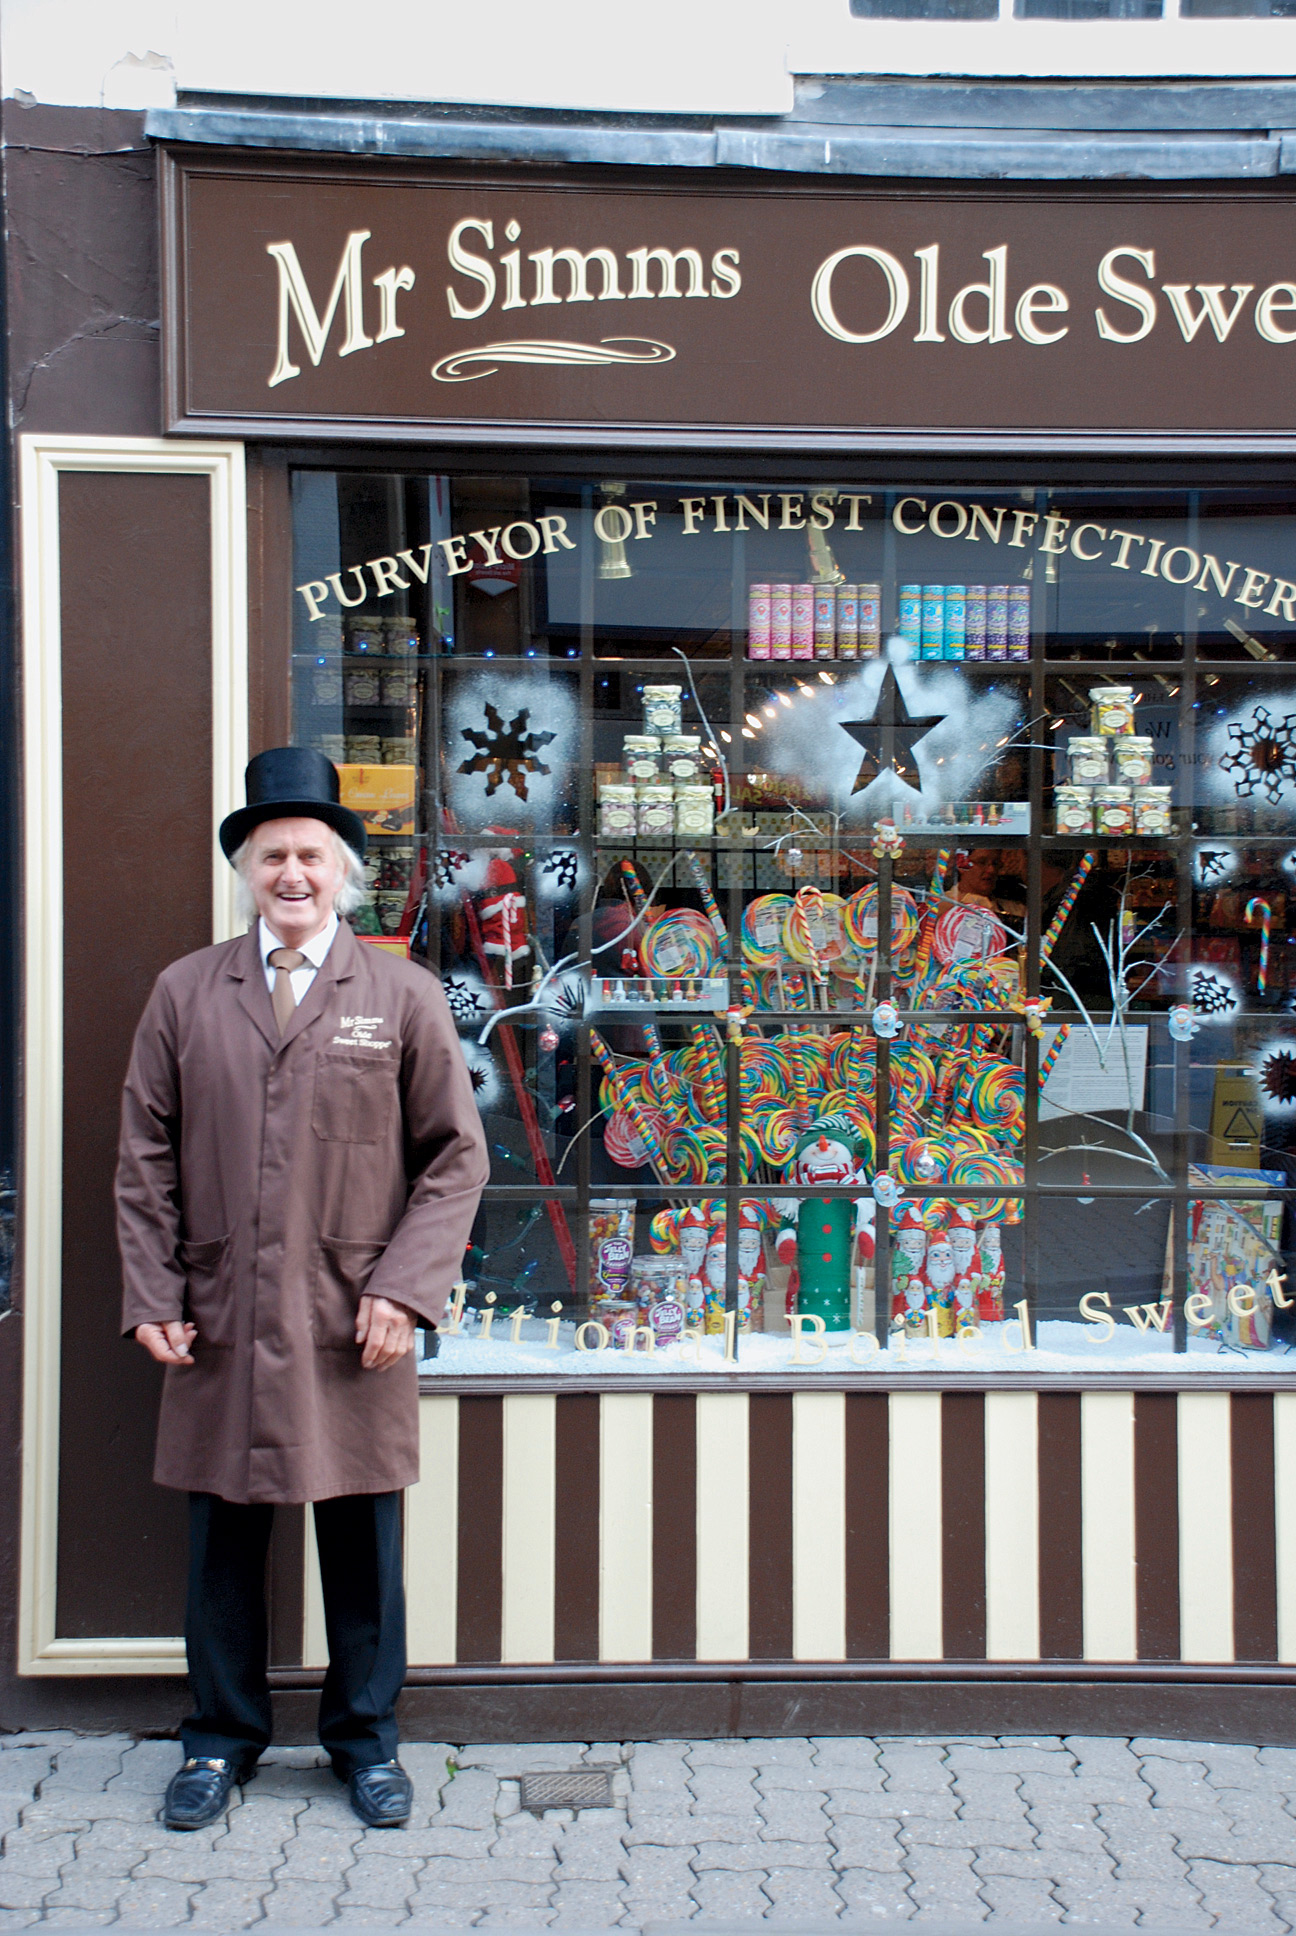 A confectionary shop in Stratford-upon-Avon.